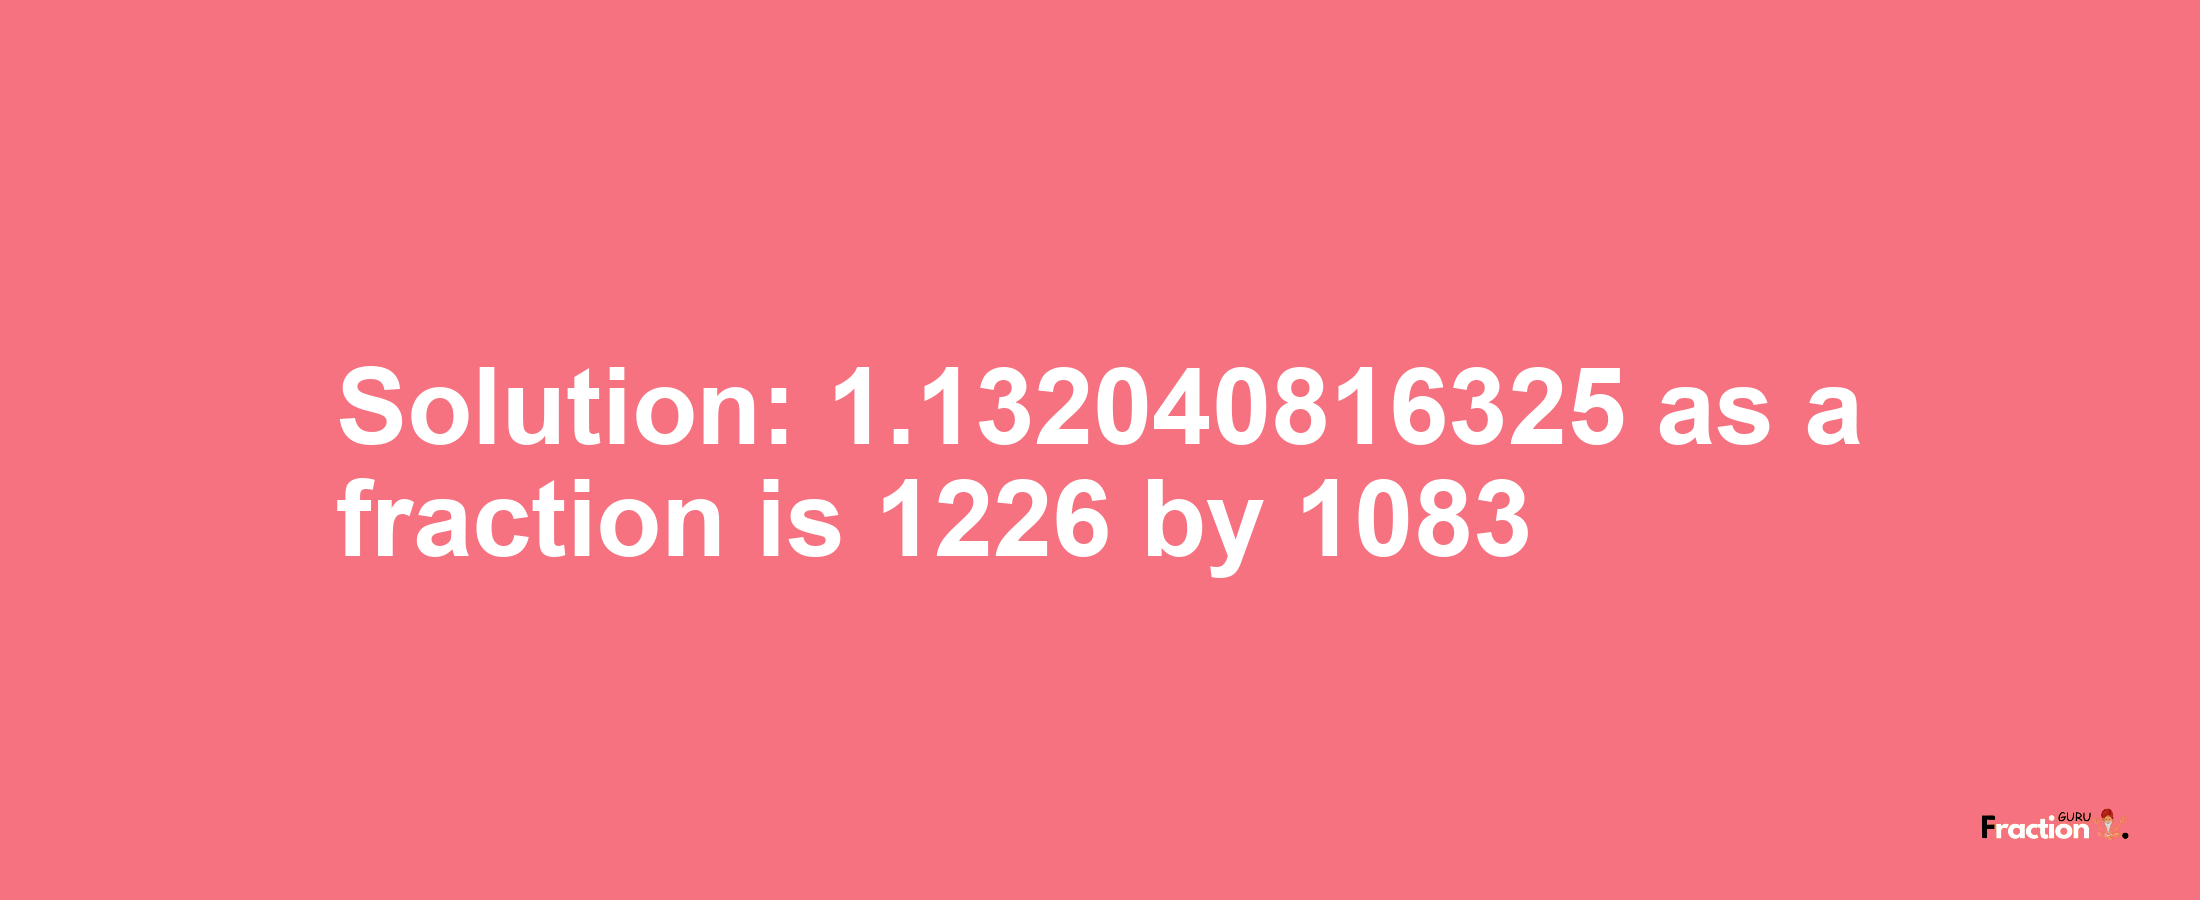 Solution:1.132040816325 as a fraction is 1226/1083